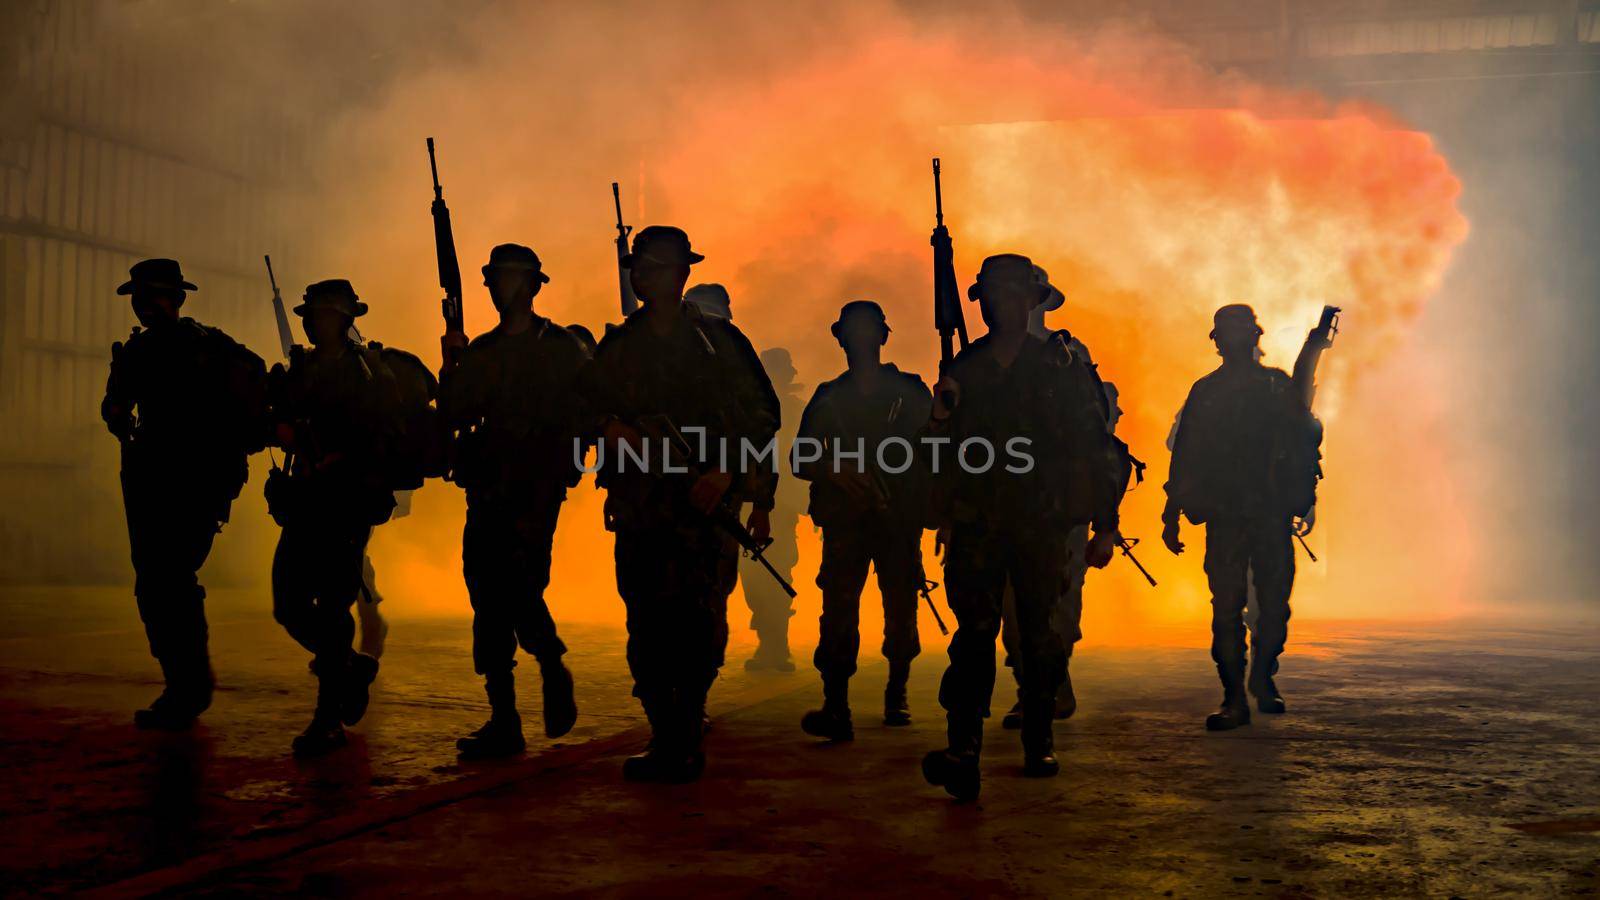 Silhouettes of soldiers during Military Mission at dusk
Silhouettes of army soldiers in the fog against a sunset, marines team in action, surrounded fire and smoke, shooting with assault rifle and machine gun, attacking enemy
